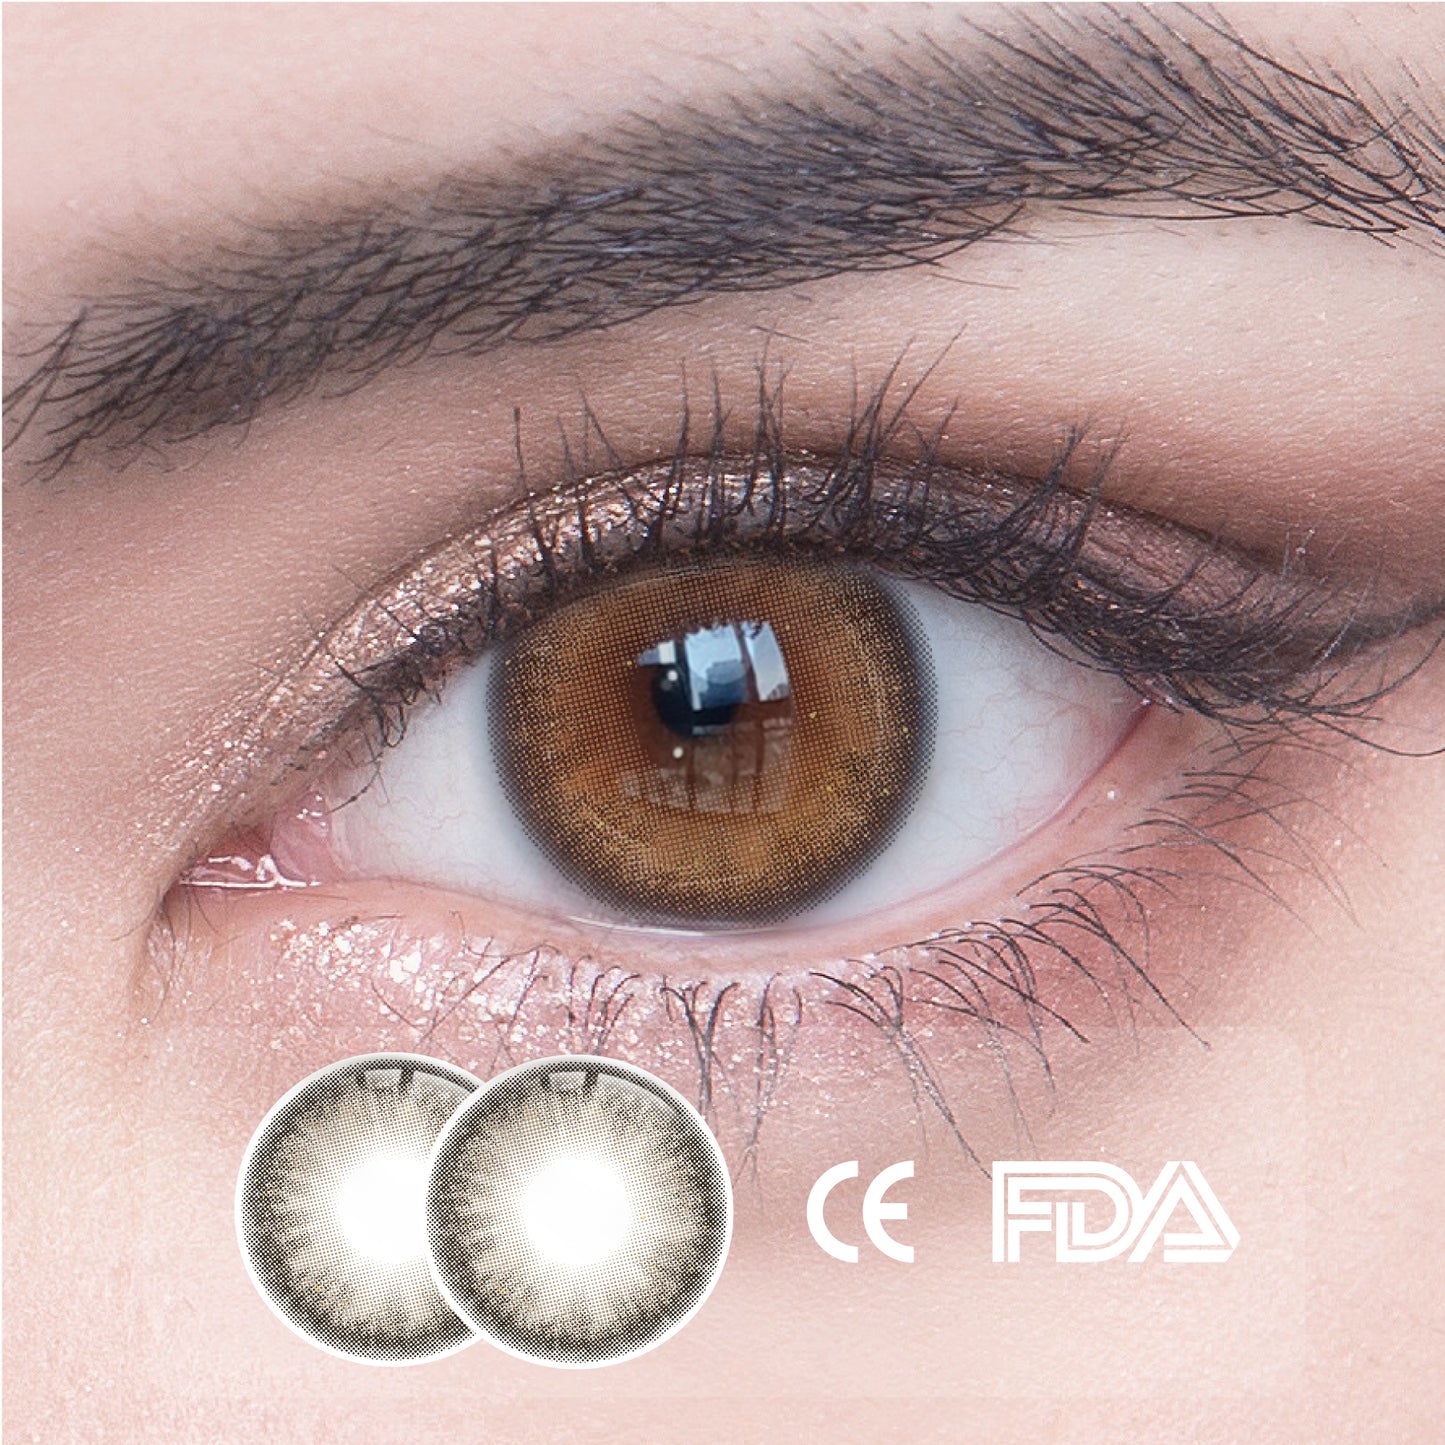 1pcs FDA Certificate Eyes Colorful Contact Lenses - Cersei brown